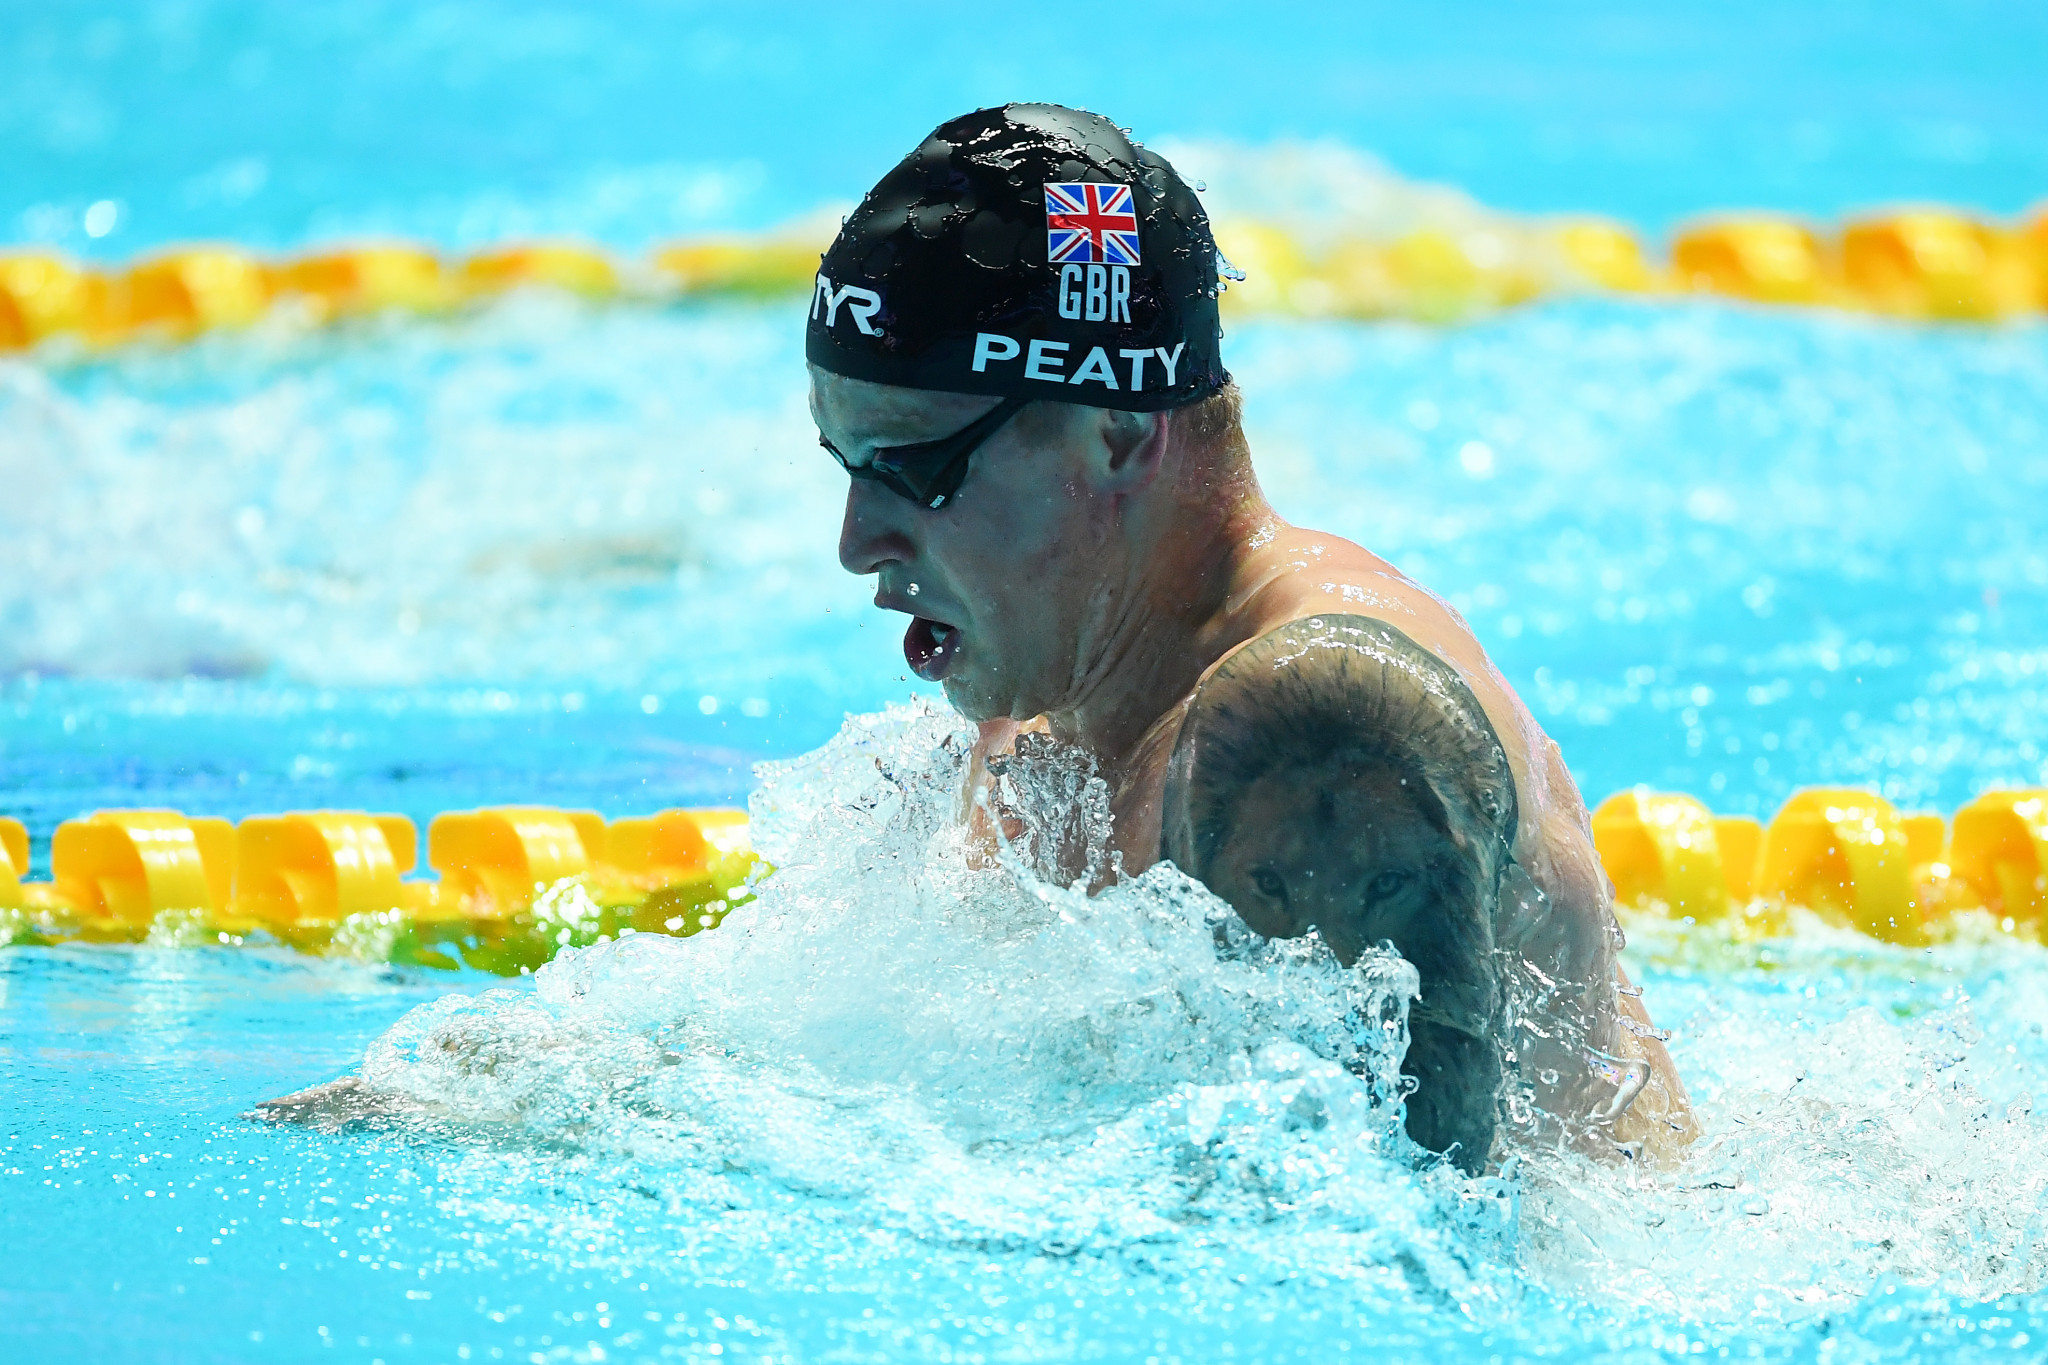 Adam Peaty will be looking to defend his Olympic 100m breaststroke title after being selected for Tokyo 2020 ©Getty Images